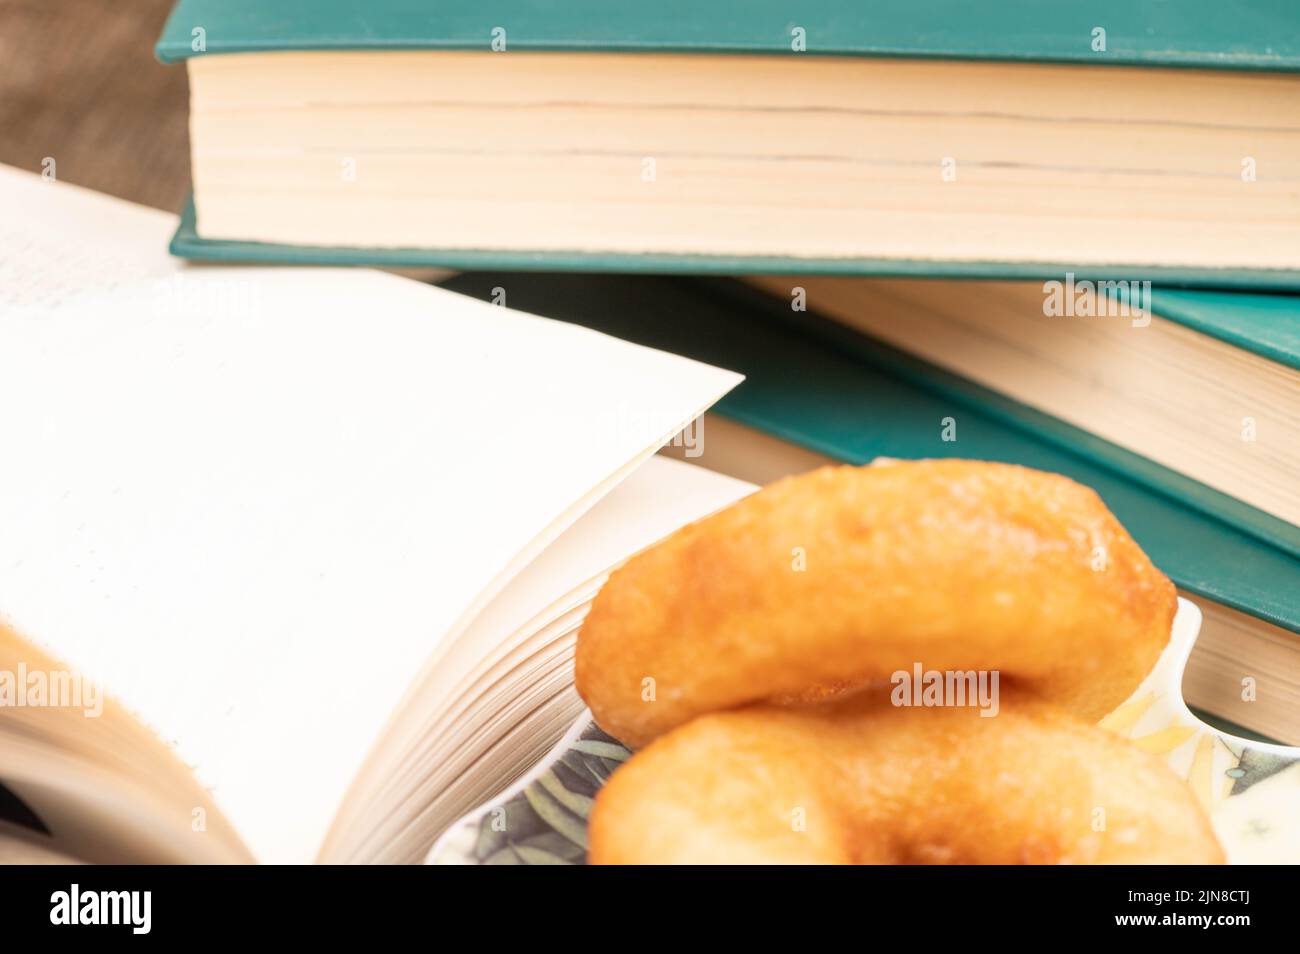 A cup of strong tea on a saucer, donuts on a plate and a stack of books on the table. Stock Photo